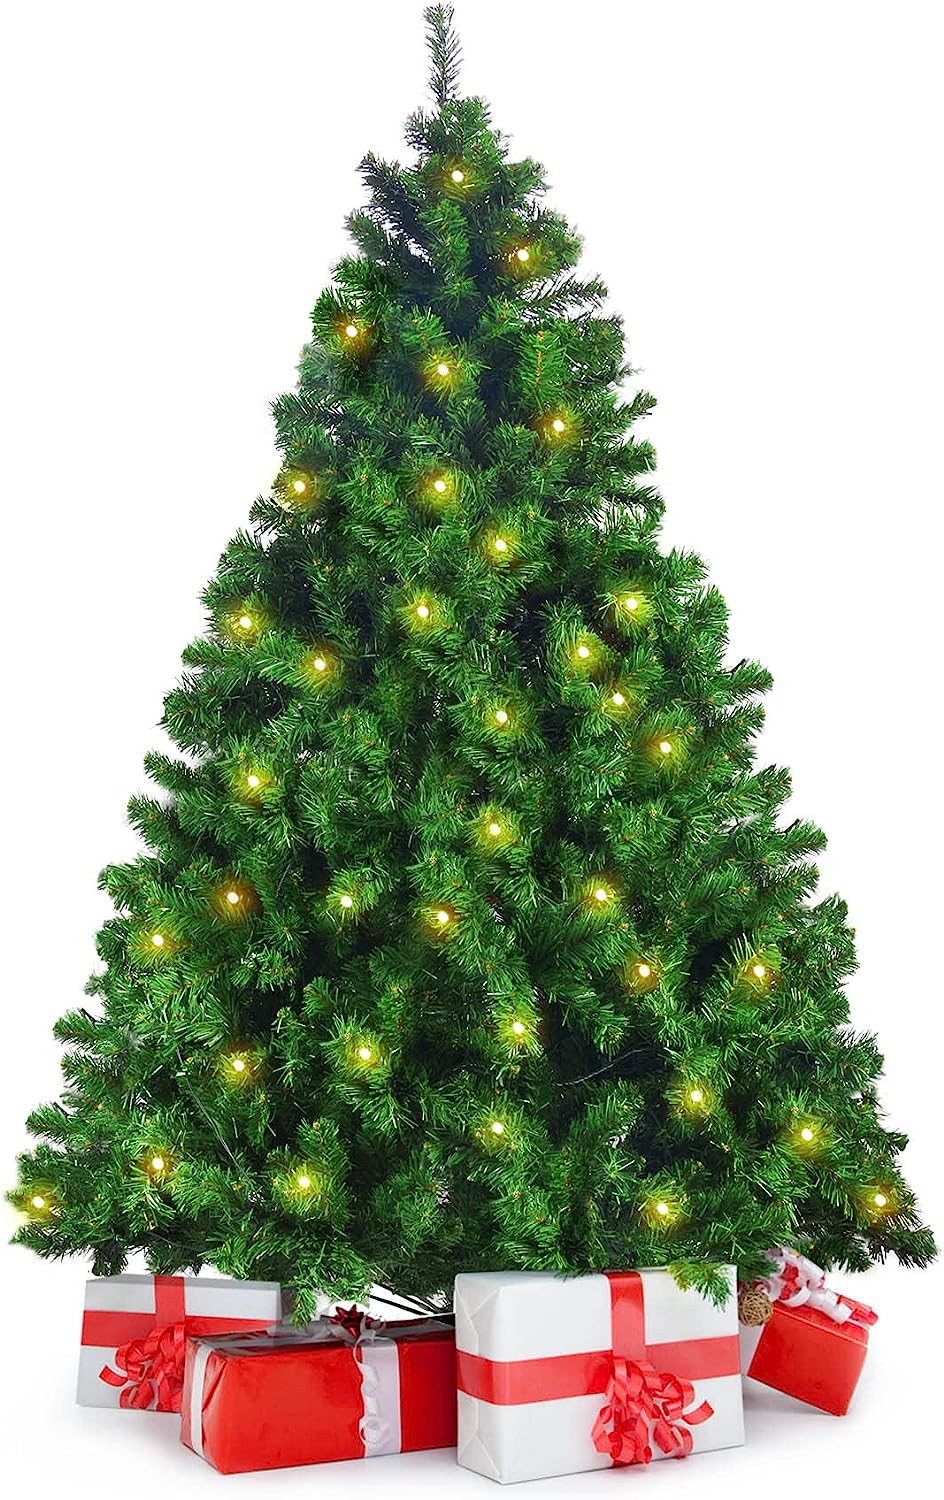 Seeutek 6ft Christmas Tree with Lights,Remote Control [...]